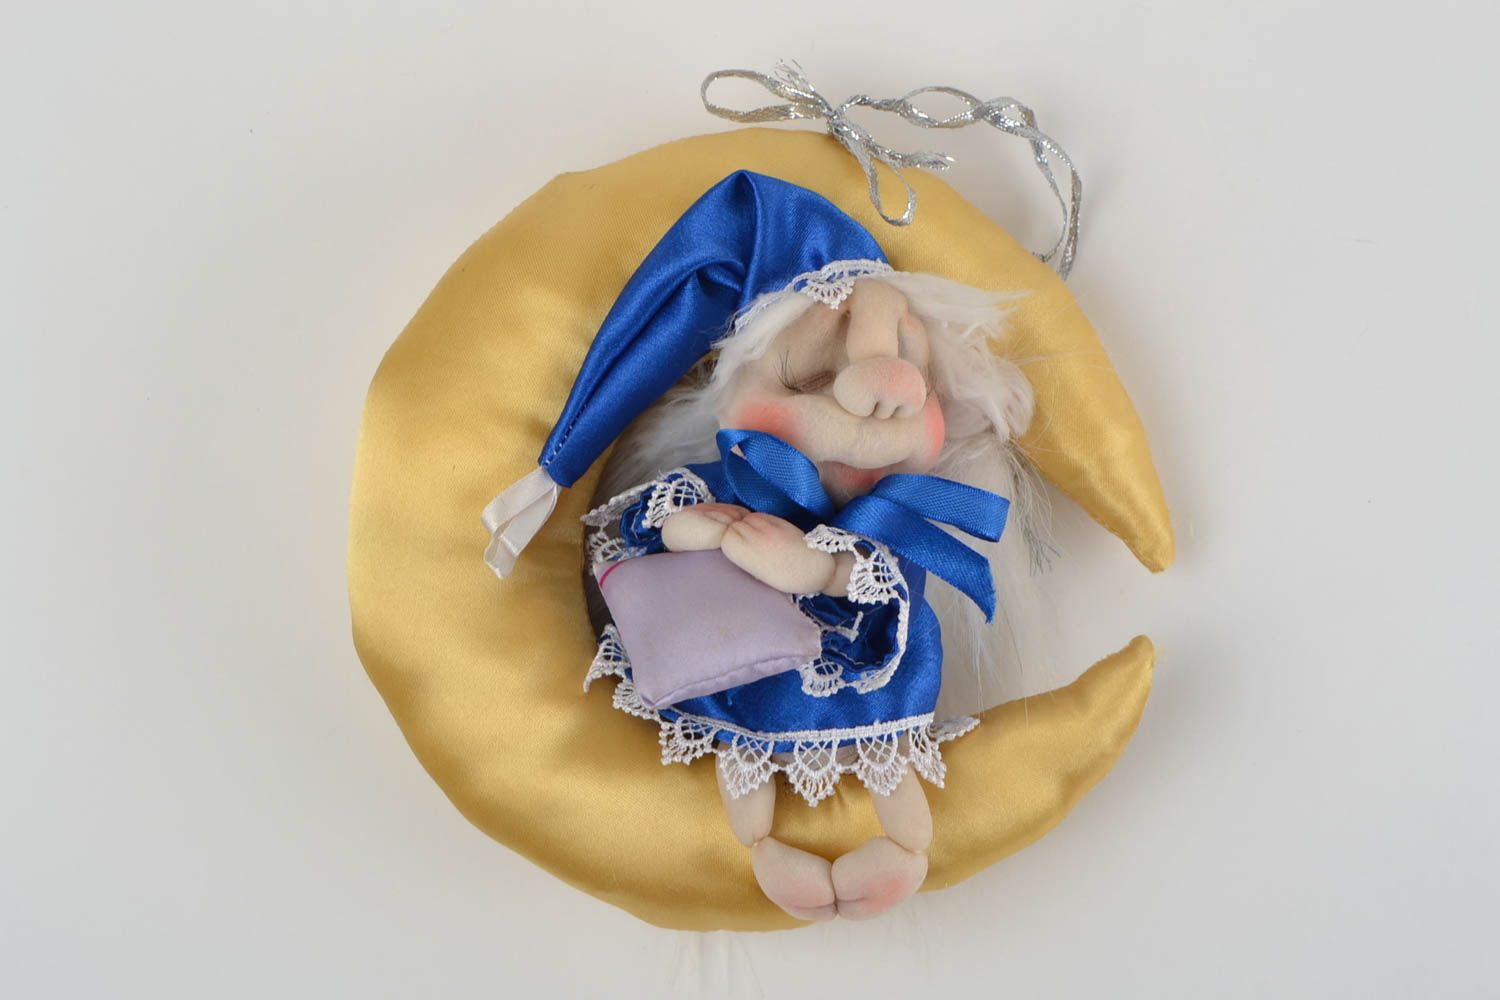 Designer doll handmade toys wall hanging nursery decor toys for kids soft toy photo 1